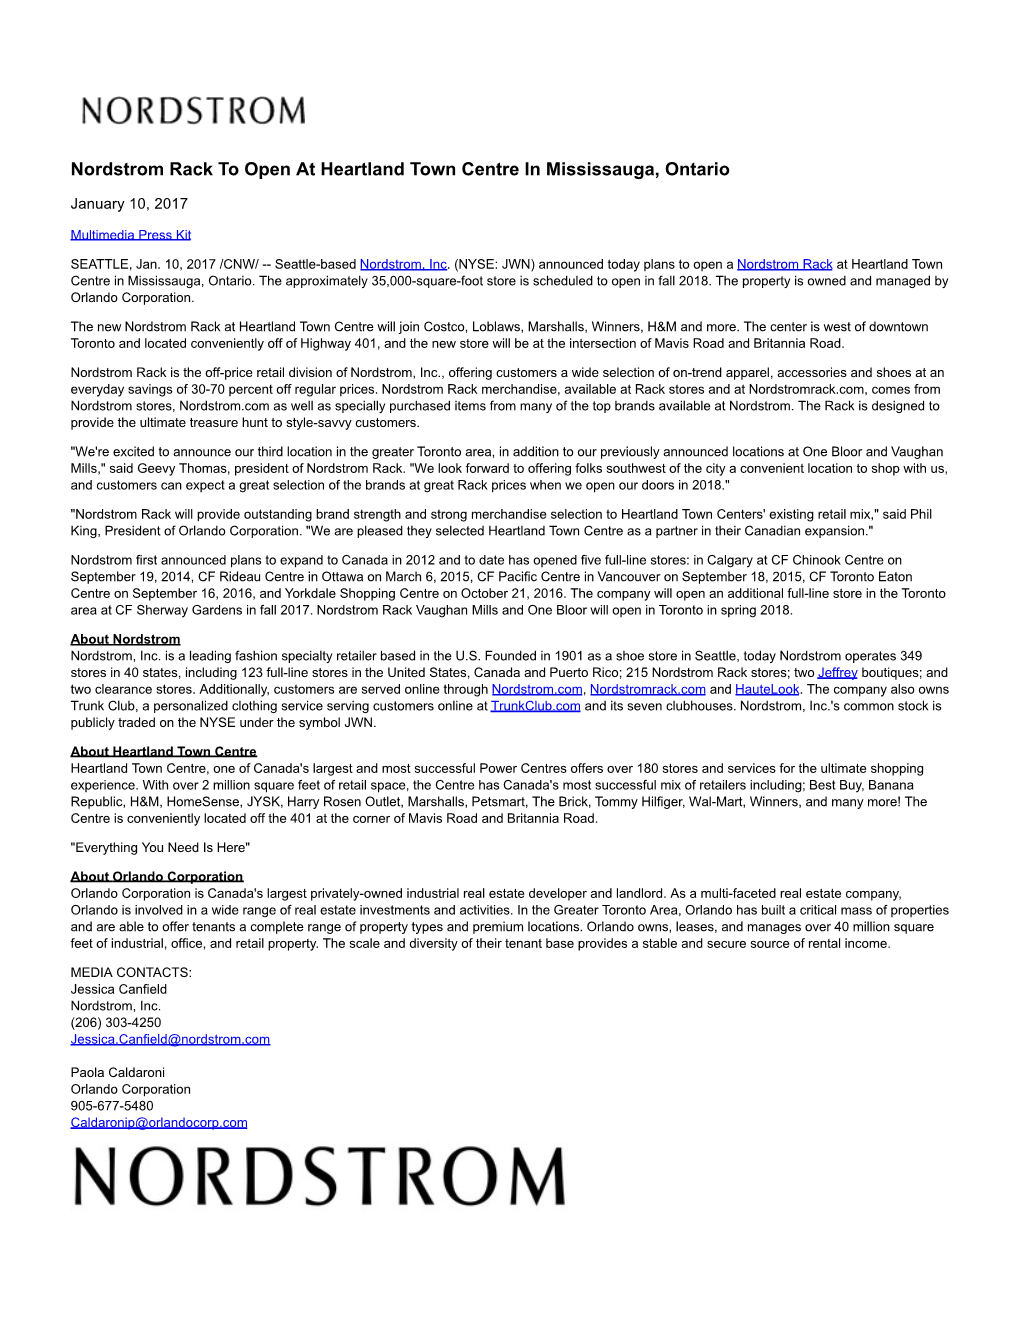 Nordstrom Rack to Open at Heartland Town Centre in Mississauga, Ontario